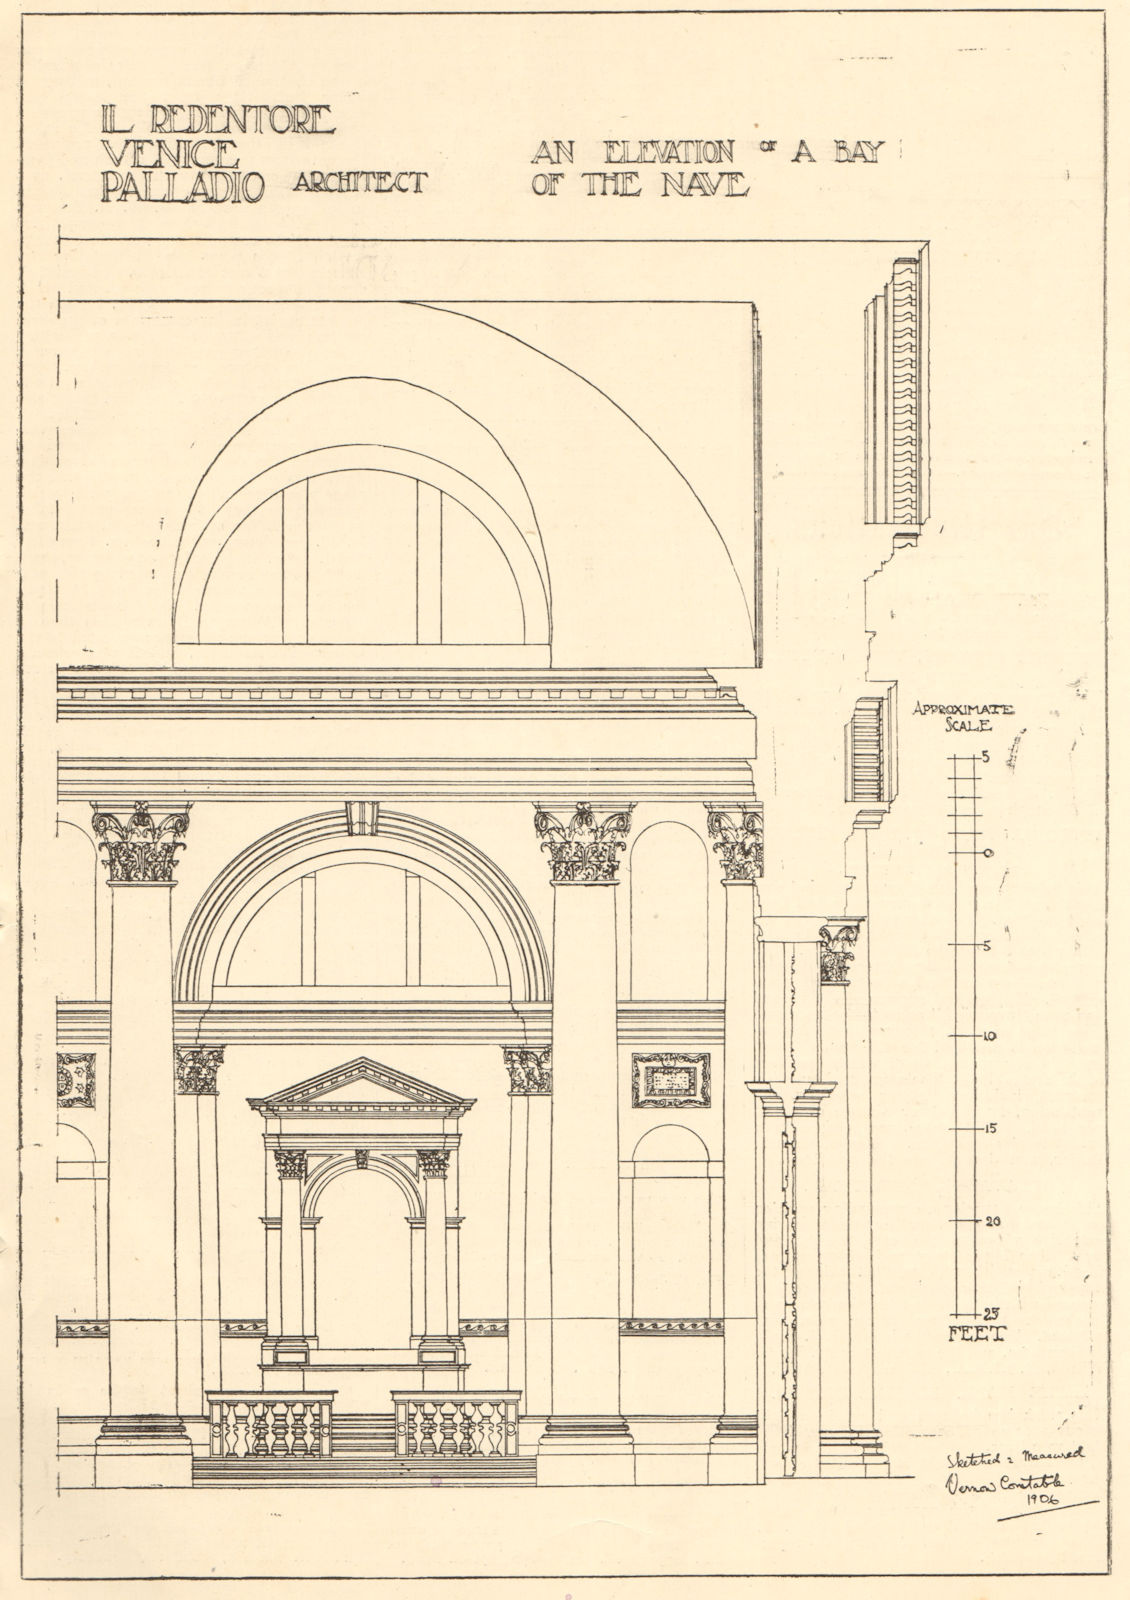 Il Redentore, Venice, Palladio, Architect. Elevation of a bay of the nave 1907